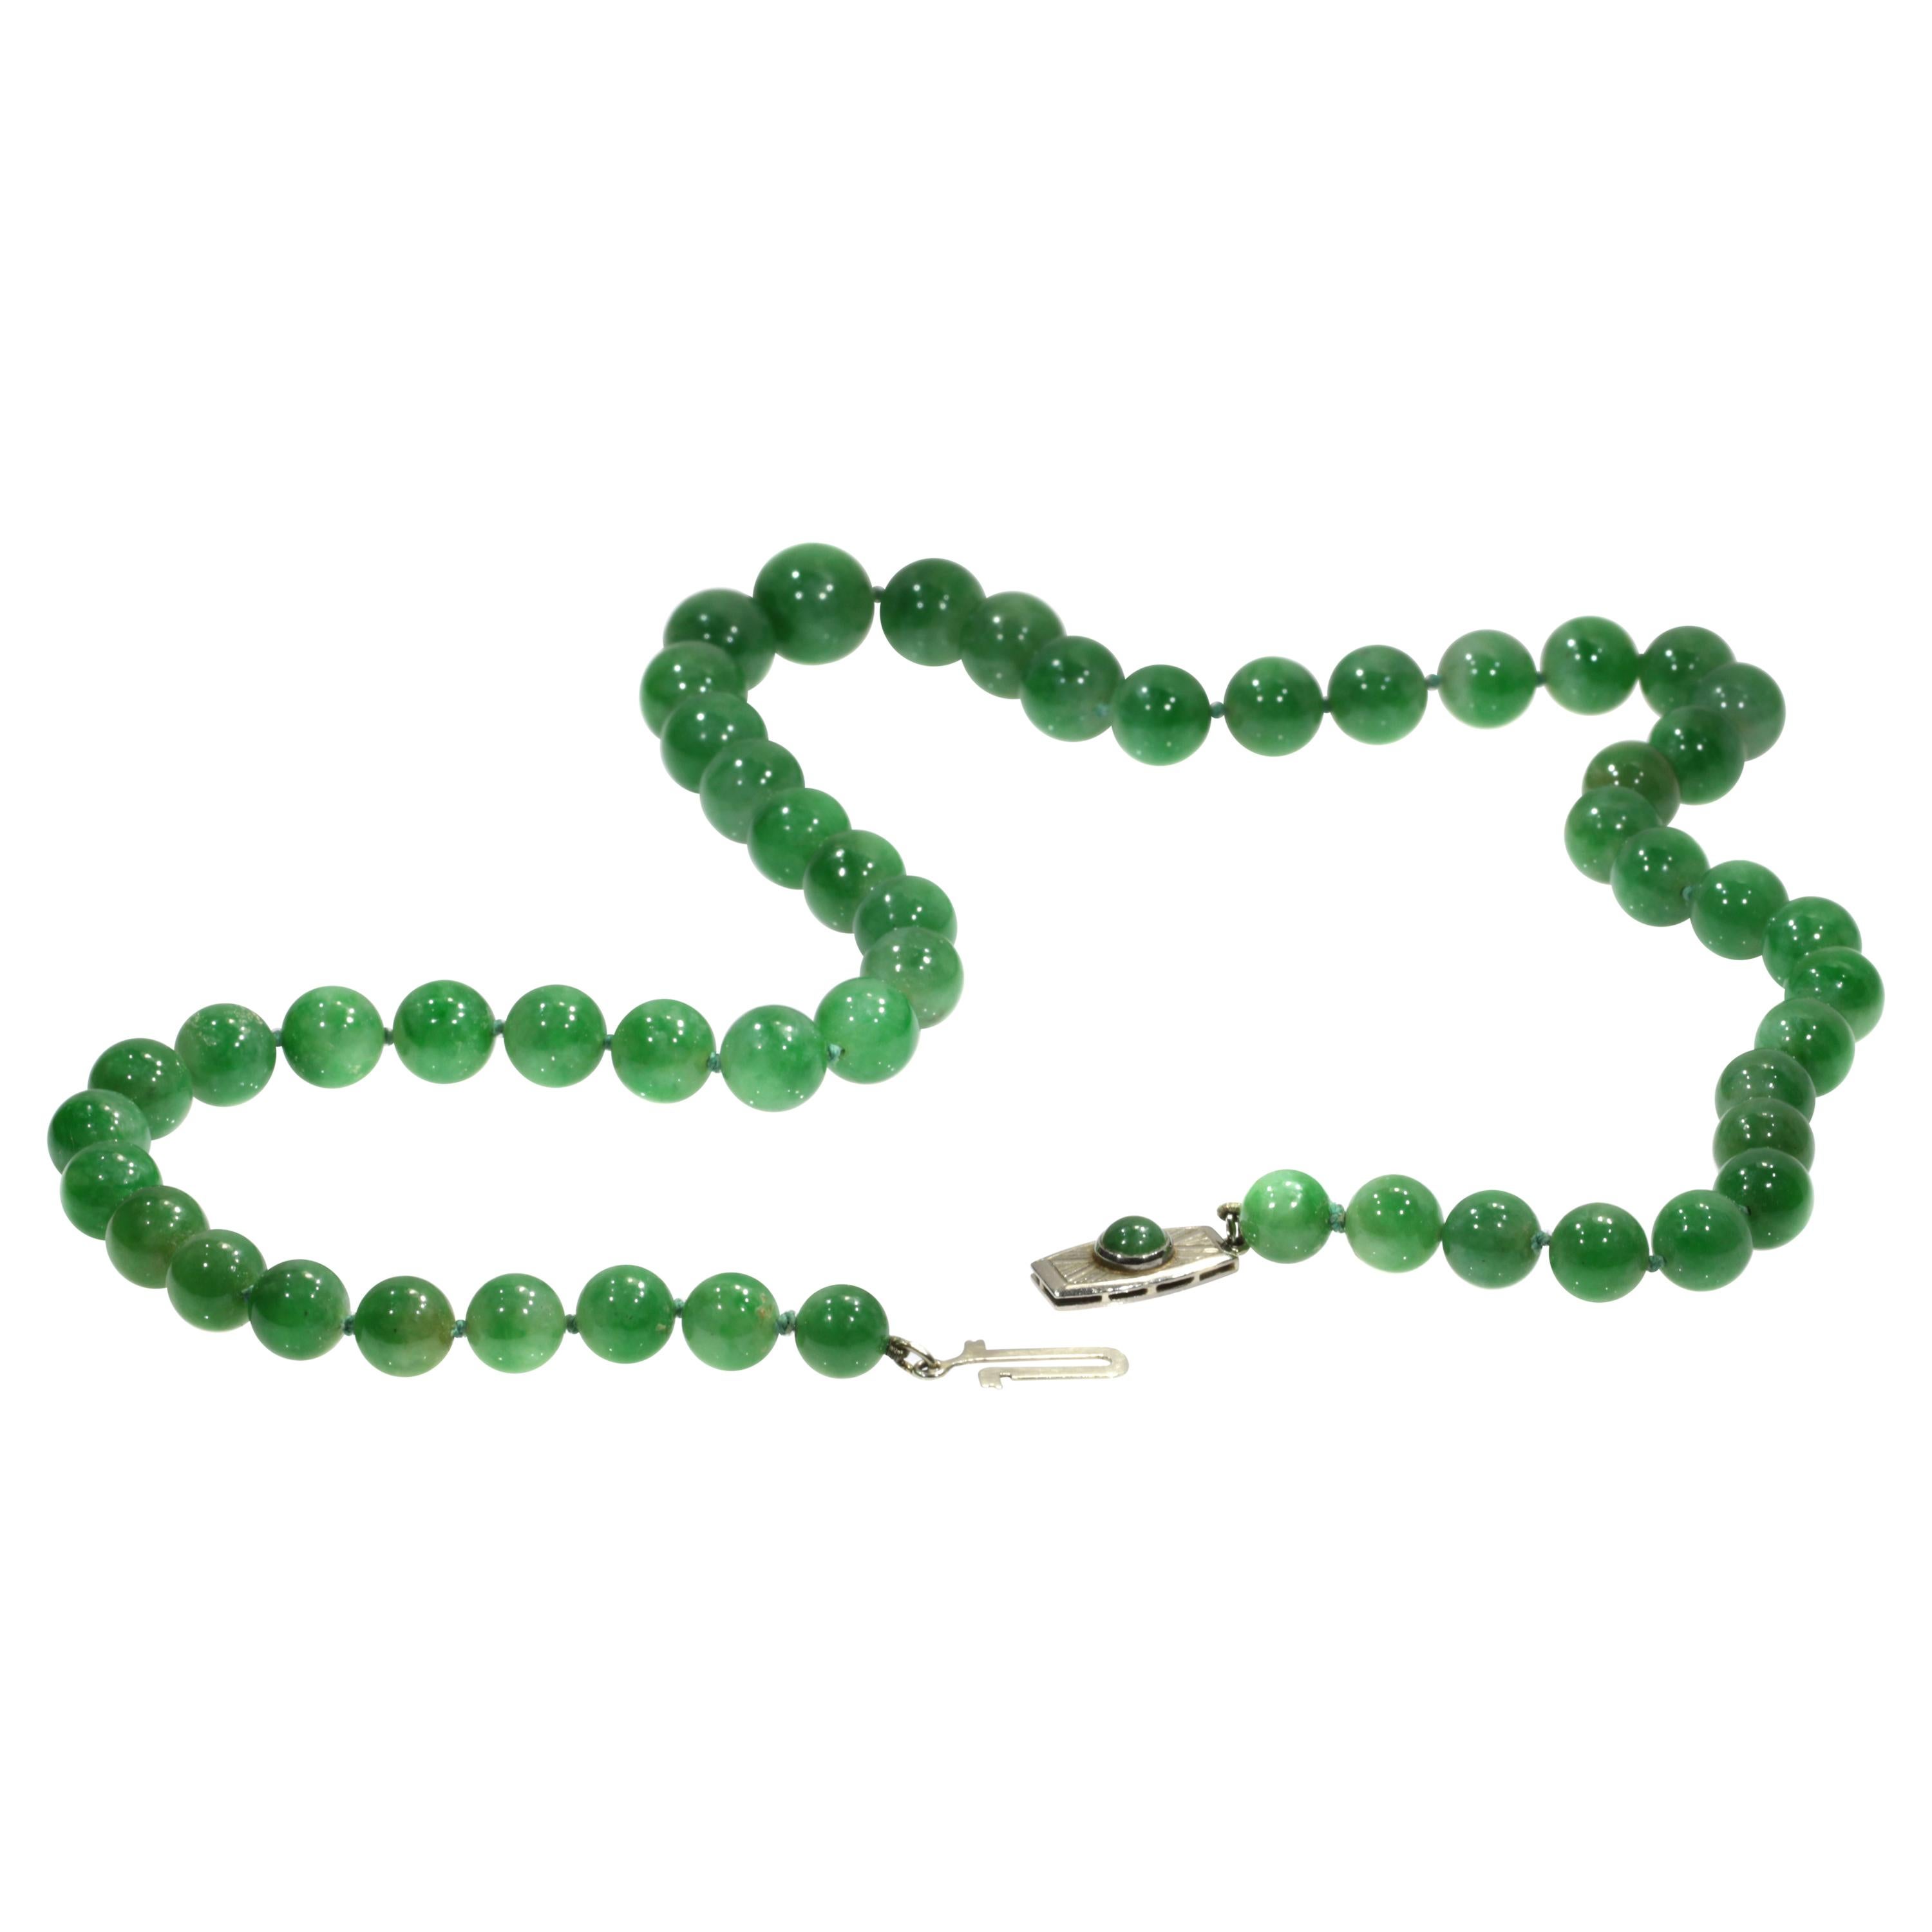 Certified Top Quality Natural A-Jadeite Necklace of 53 Beads '67.51 Grams' For Sale